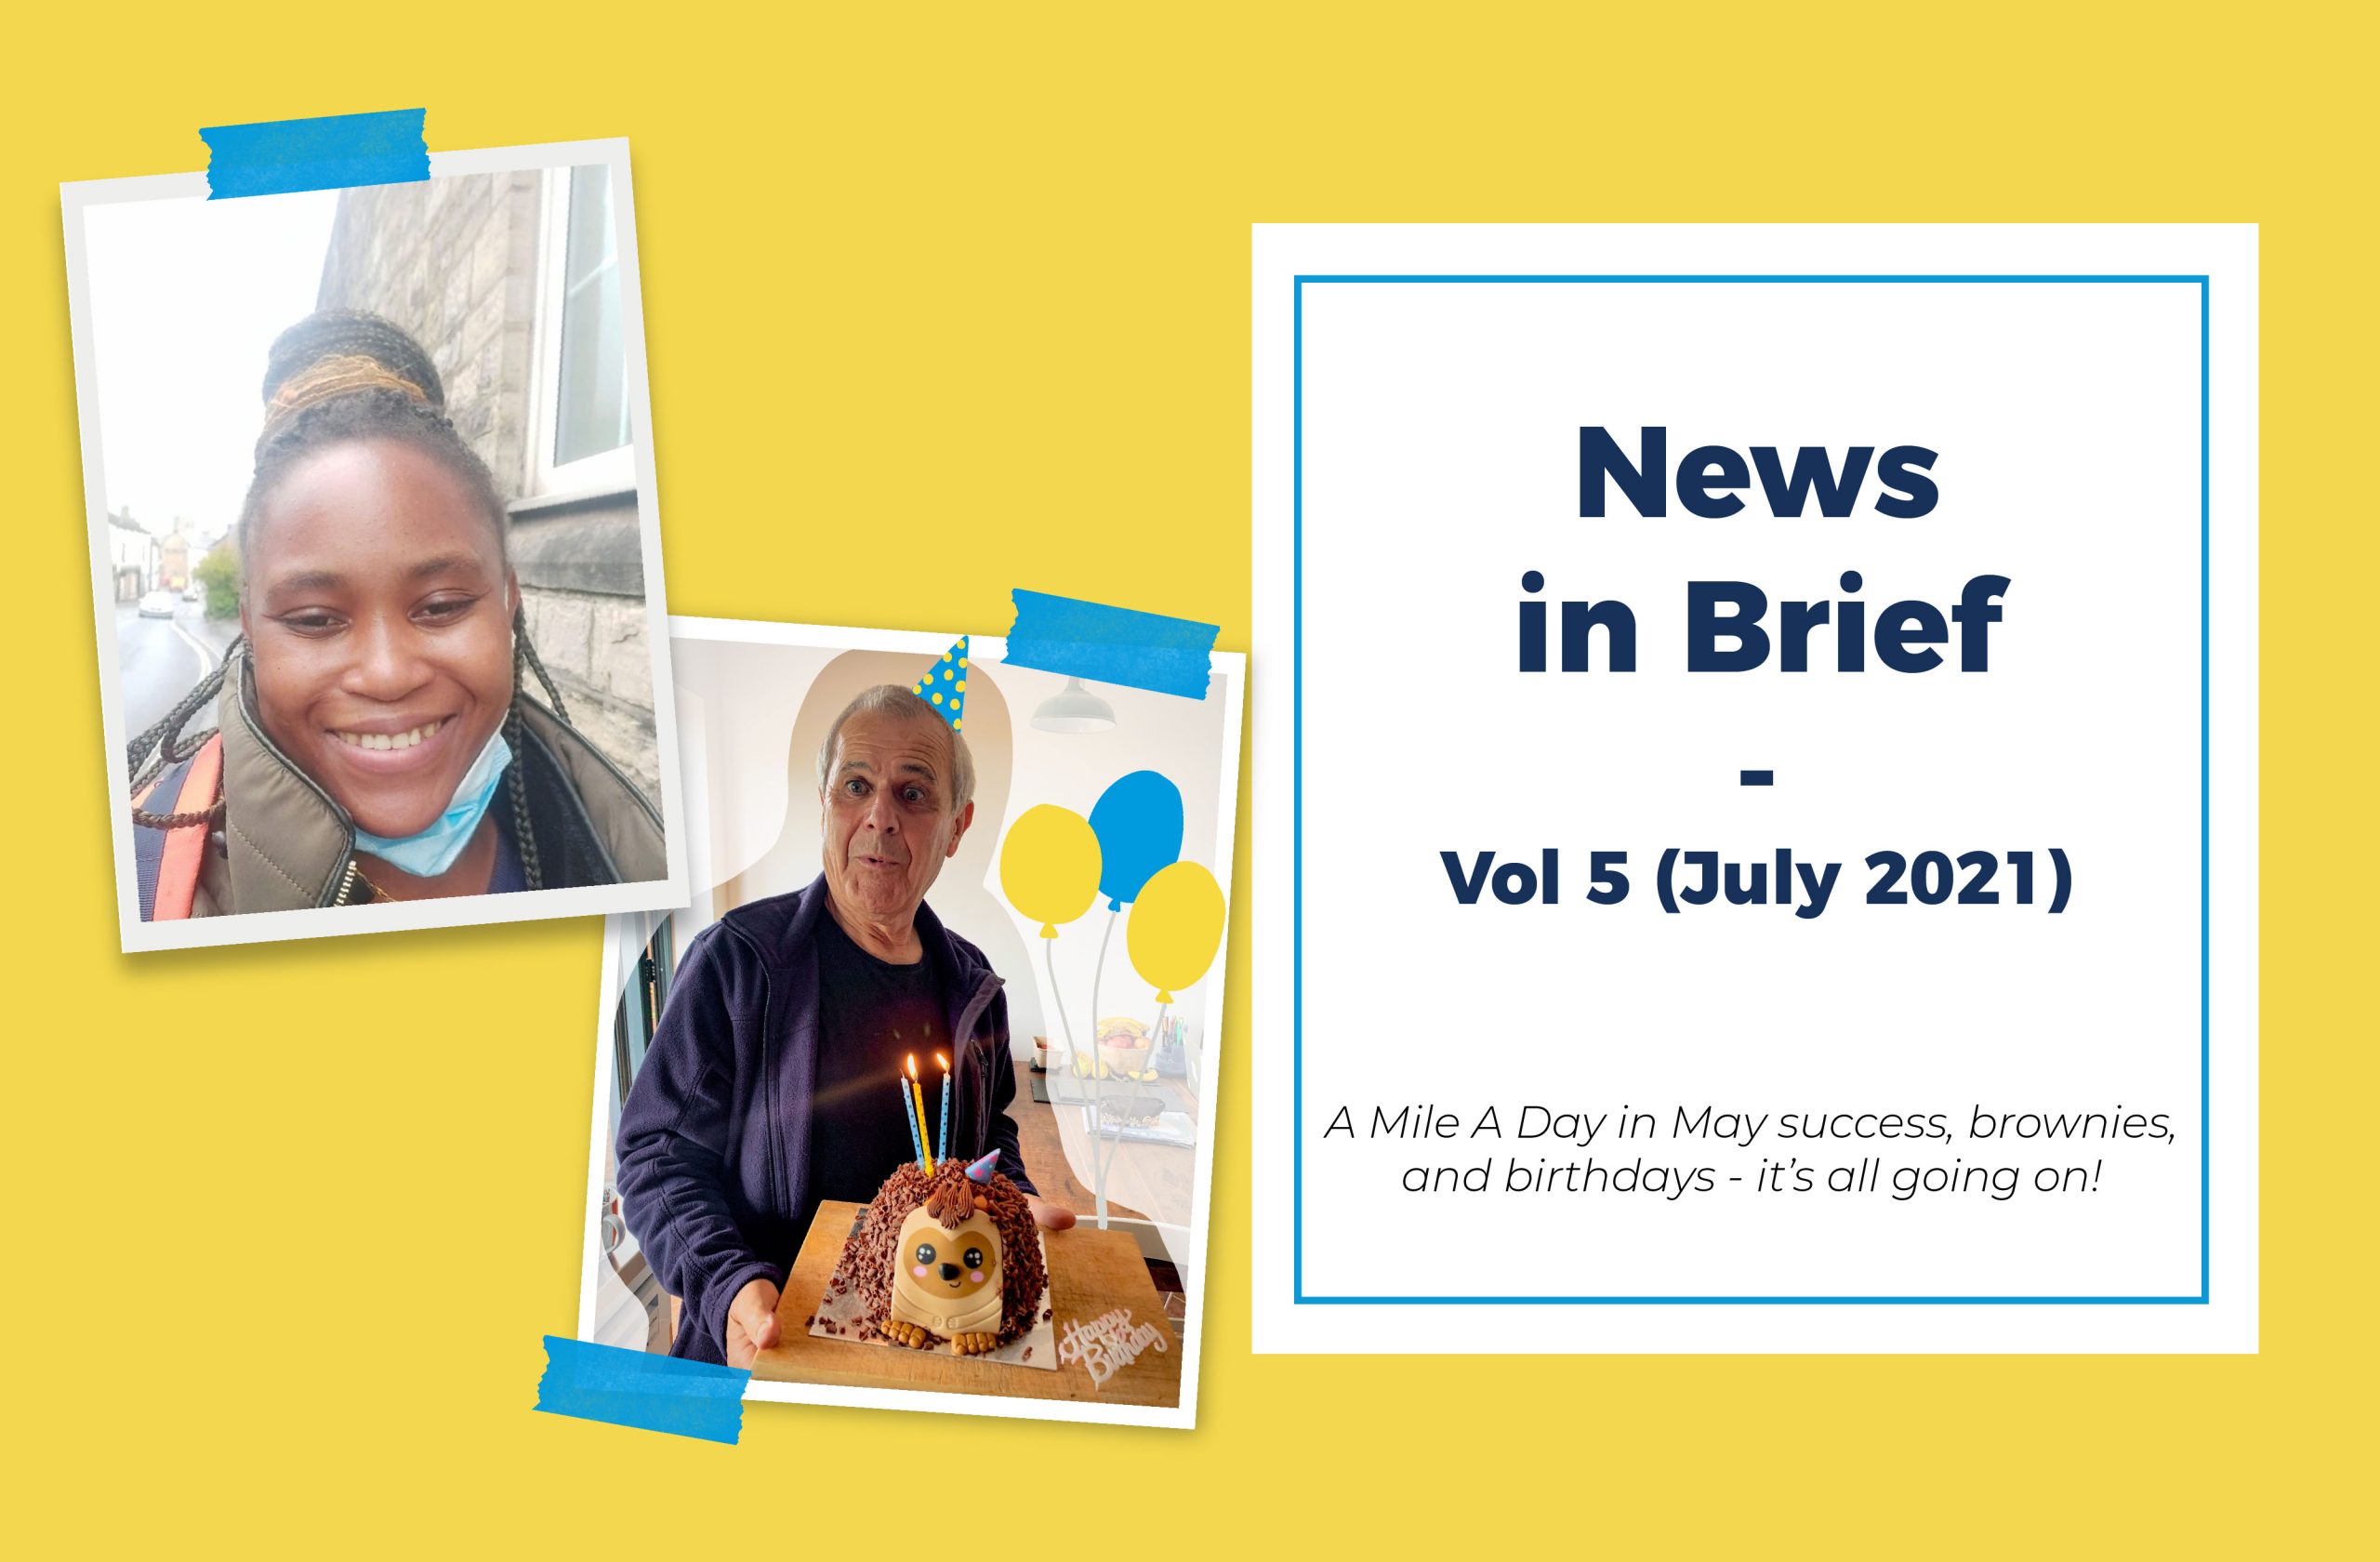 Two photos, one of a young black woman and the other of an older white man, are stuck on a yellow background next to a title &quot;News in Brief - Vol 5 (July2021) A Mile A Day in May success, brownies, and birthdays - it's all going on!